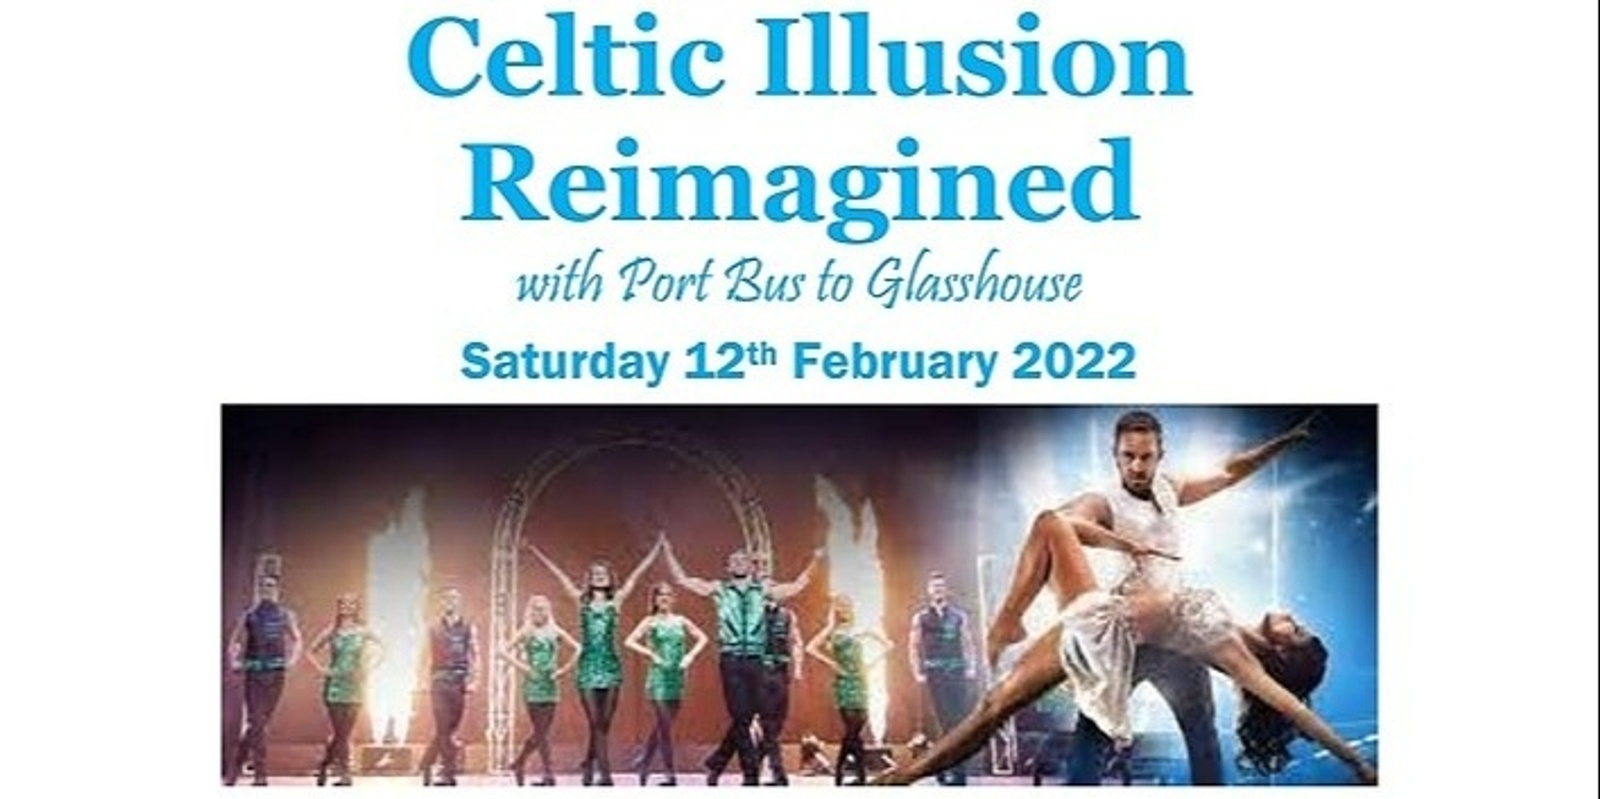 Banner image for Celtic Illusion Reimagined with Port Bus